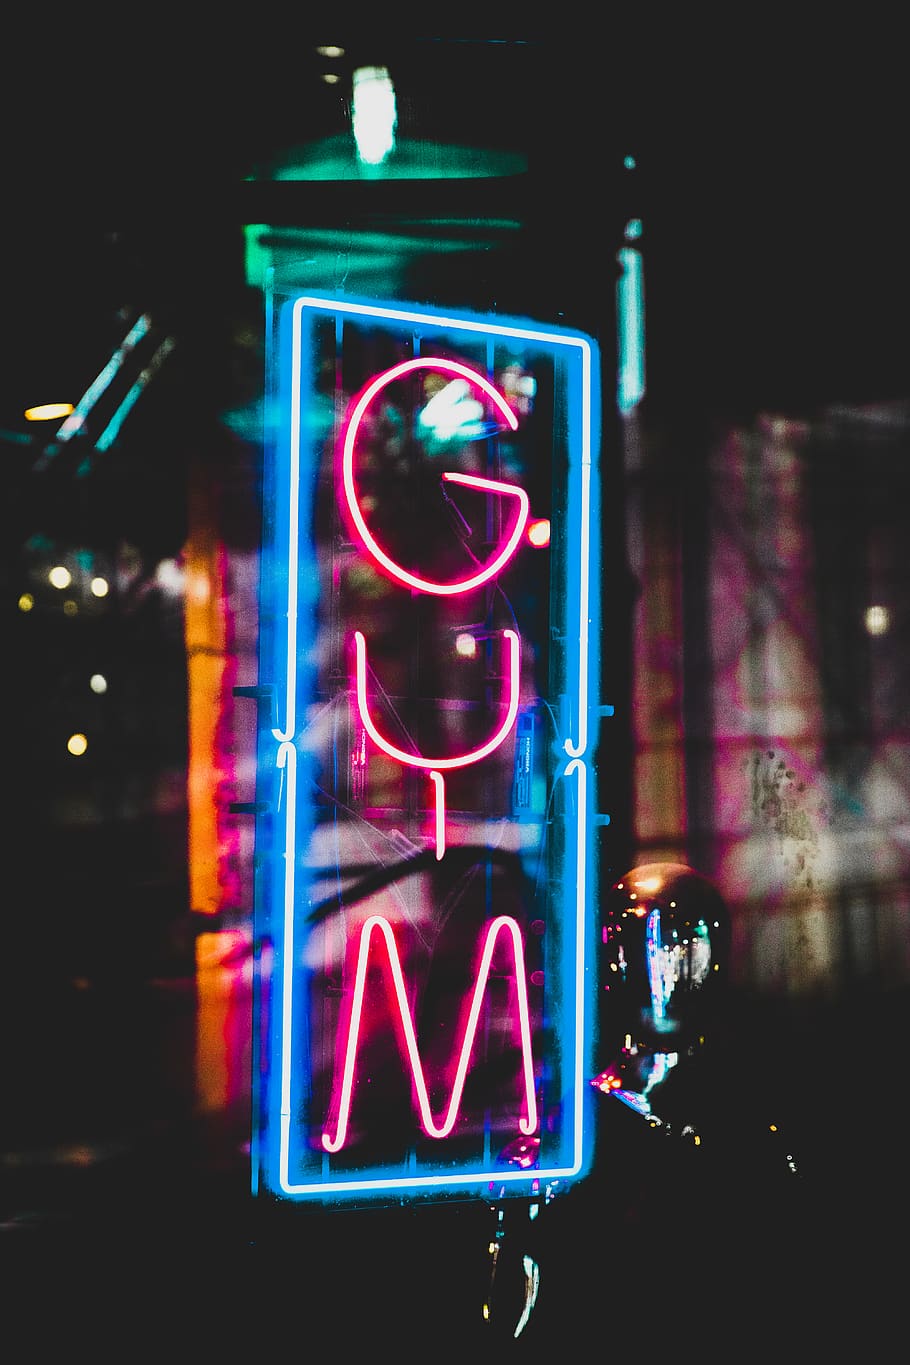 HD wallpaper: Gym neon light, united states, the gym, new york, cell phone